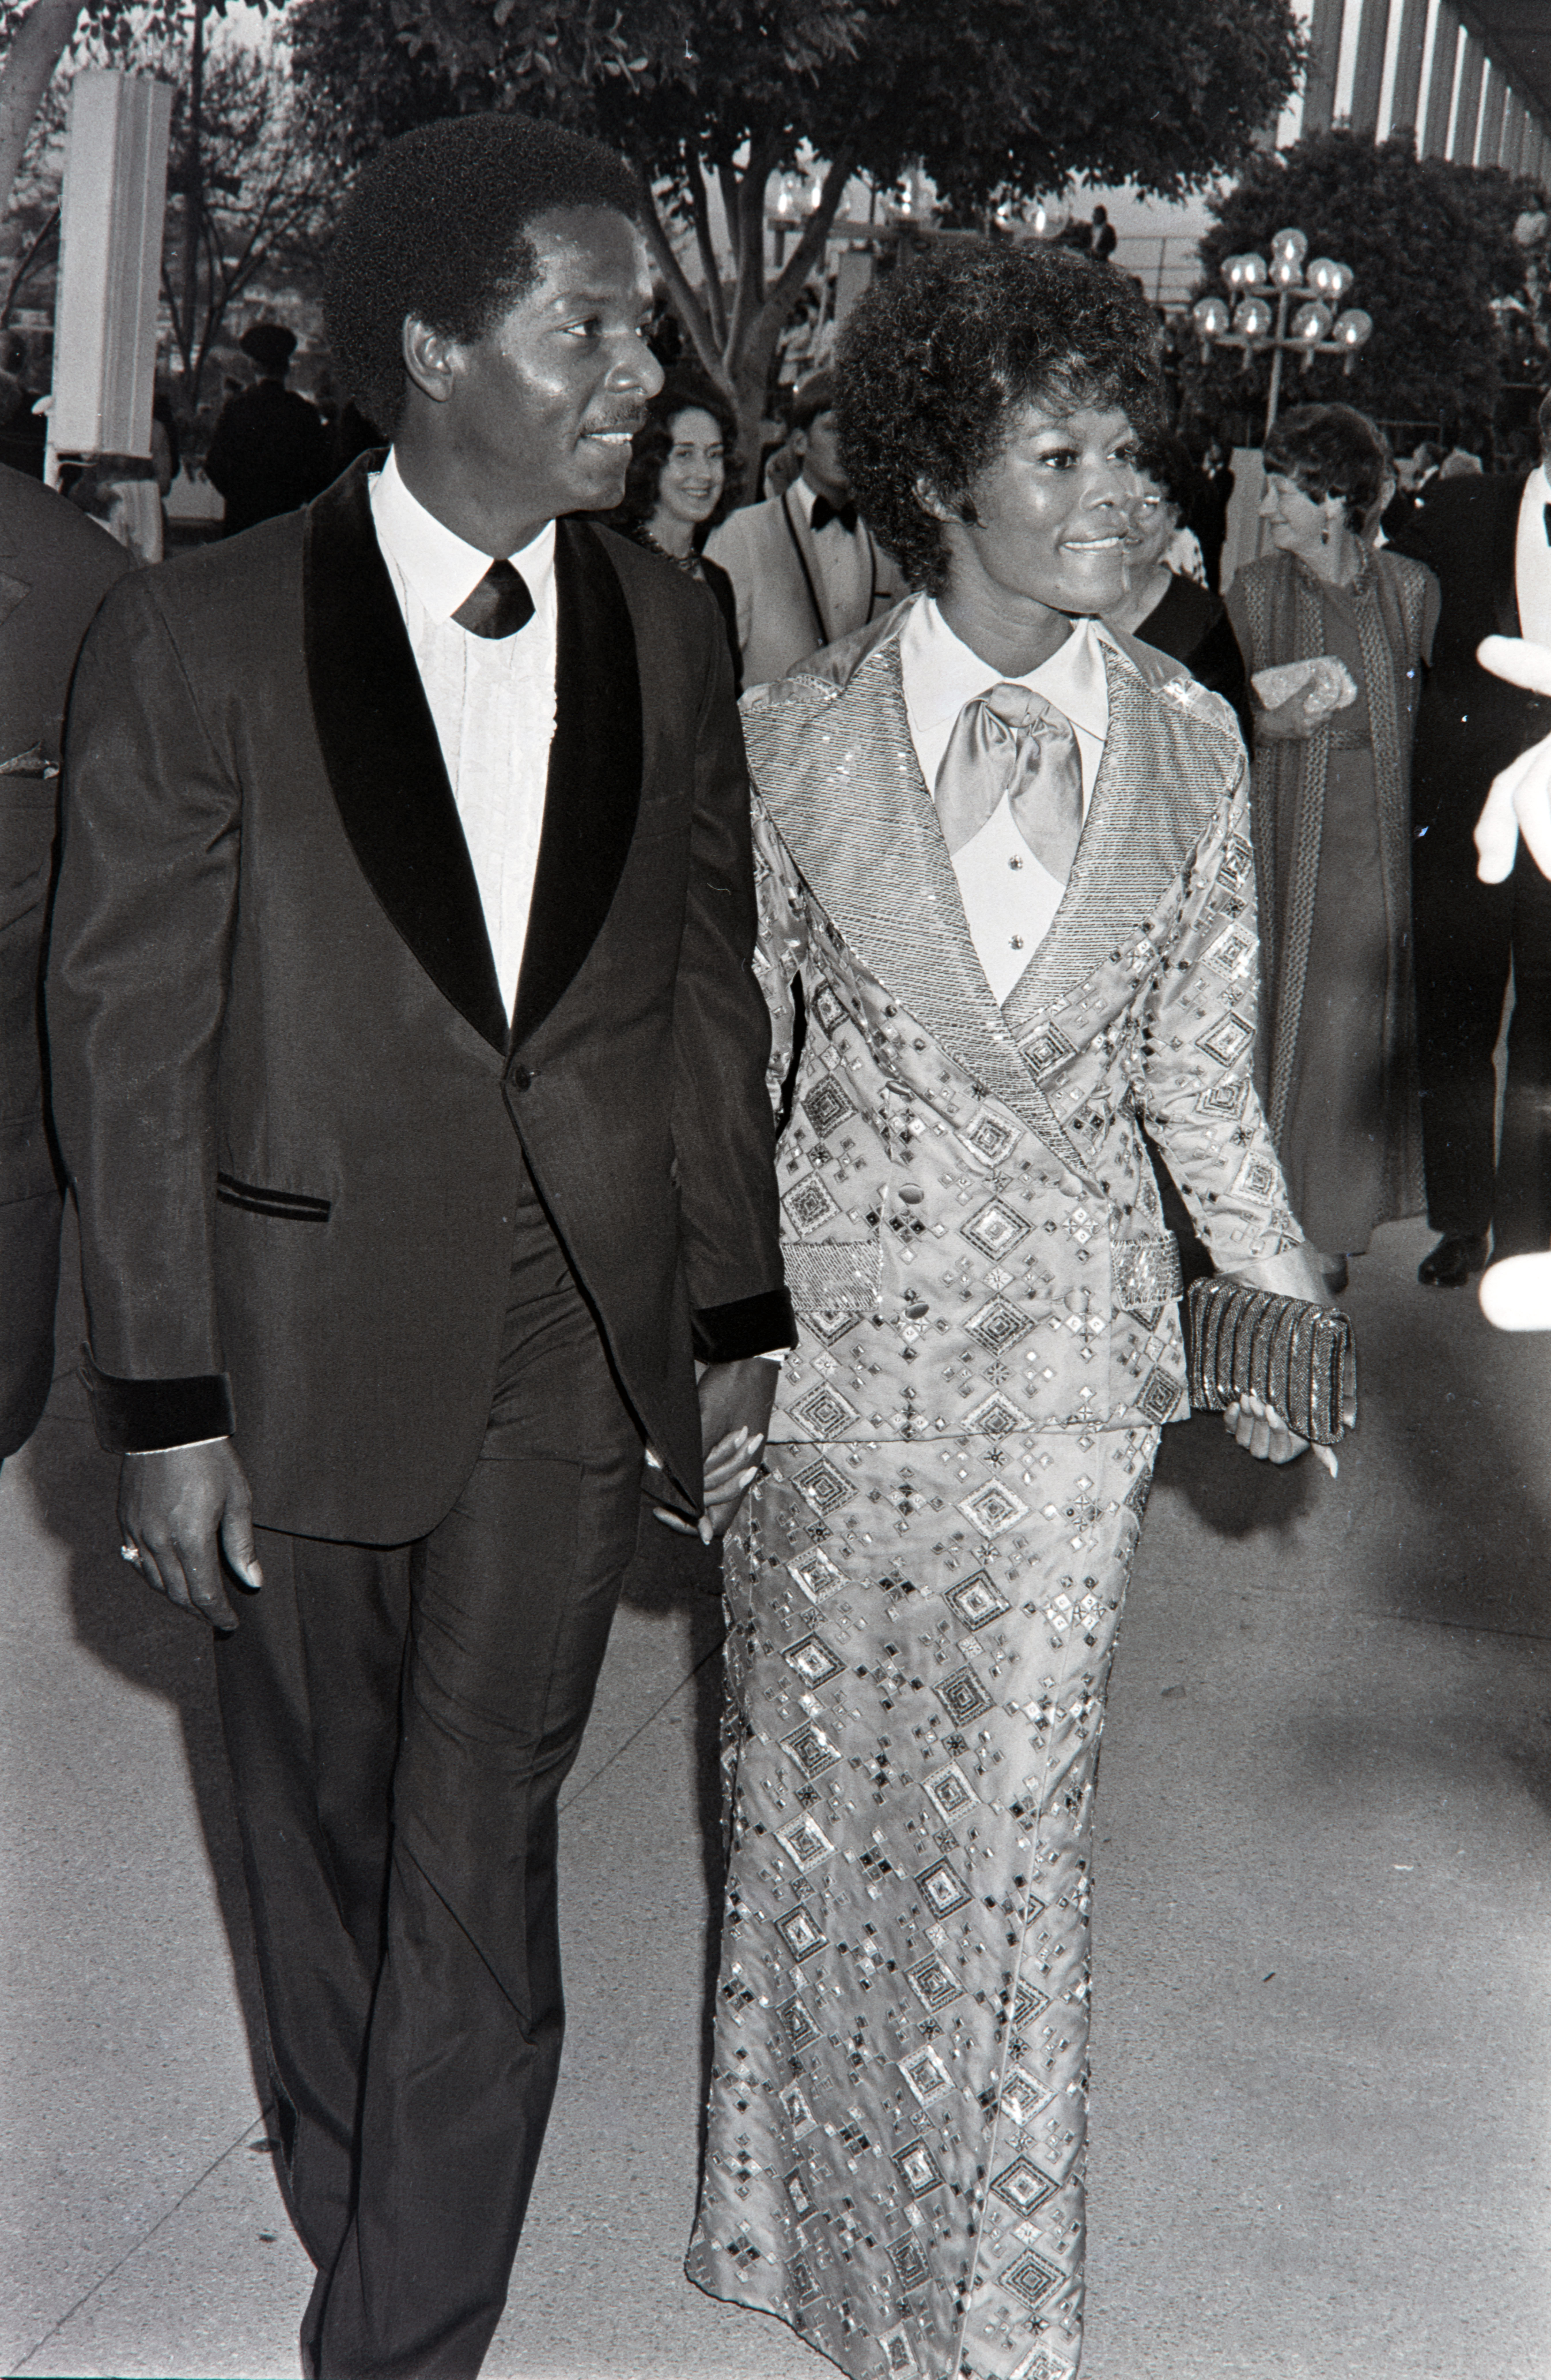 William Elliott and Dionne Warwick at the 44th Academy Awards on April 10, 1972, in Los Angeles, California. | Source: Getty Images